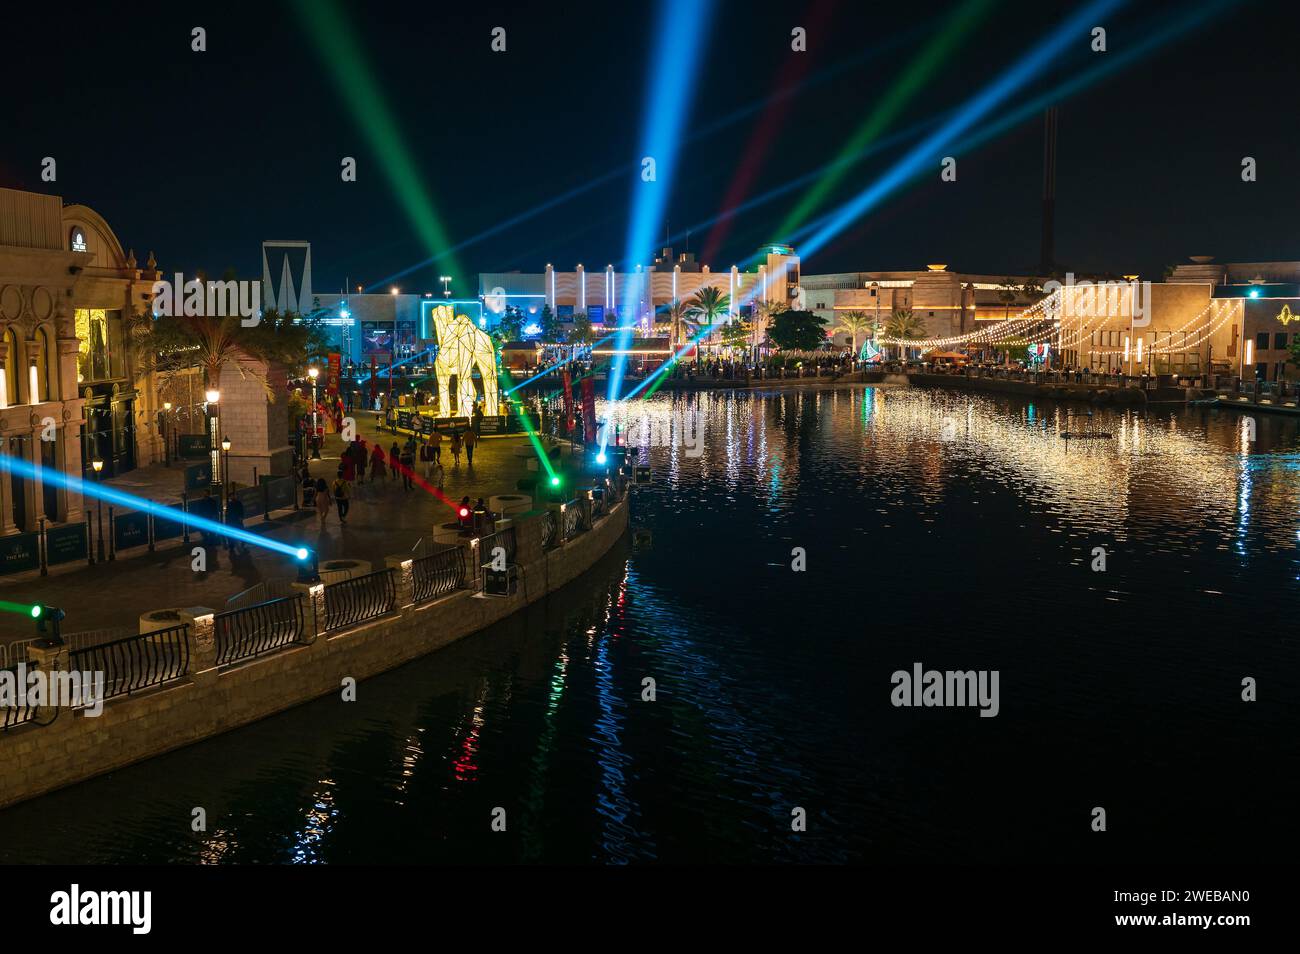 Dubai, United Arab Emirates - December 3, 2023: Night light laser show performing above Riverland theme park filled with attractions playgrounds and p Stock Photo